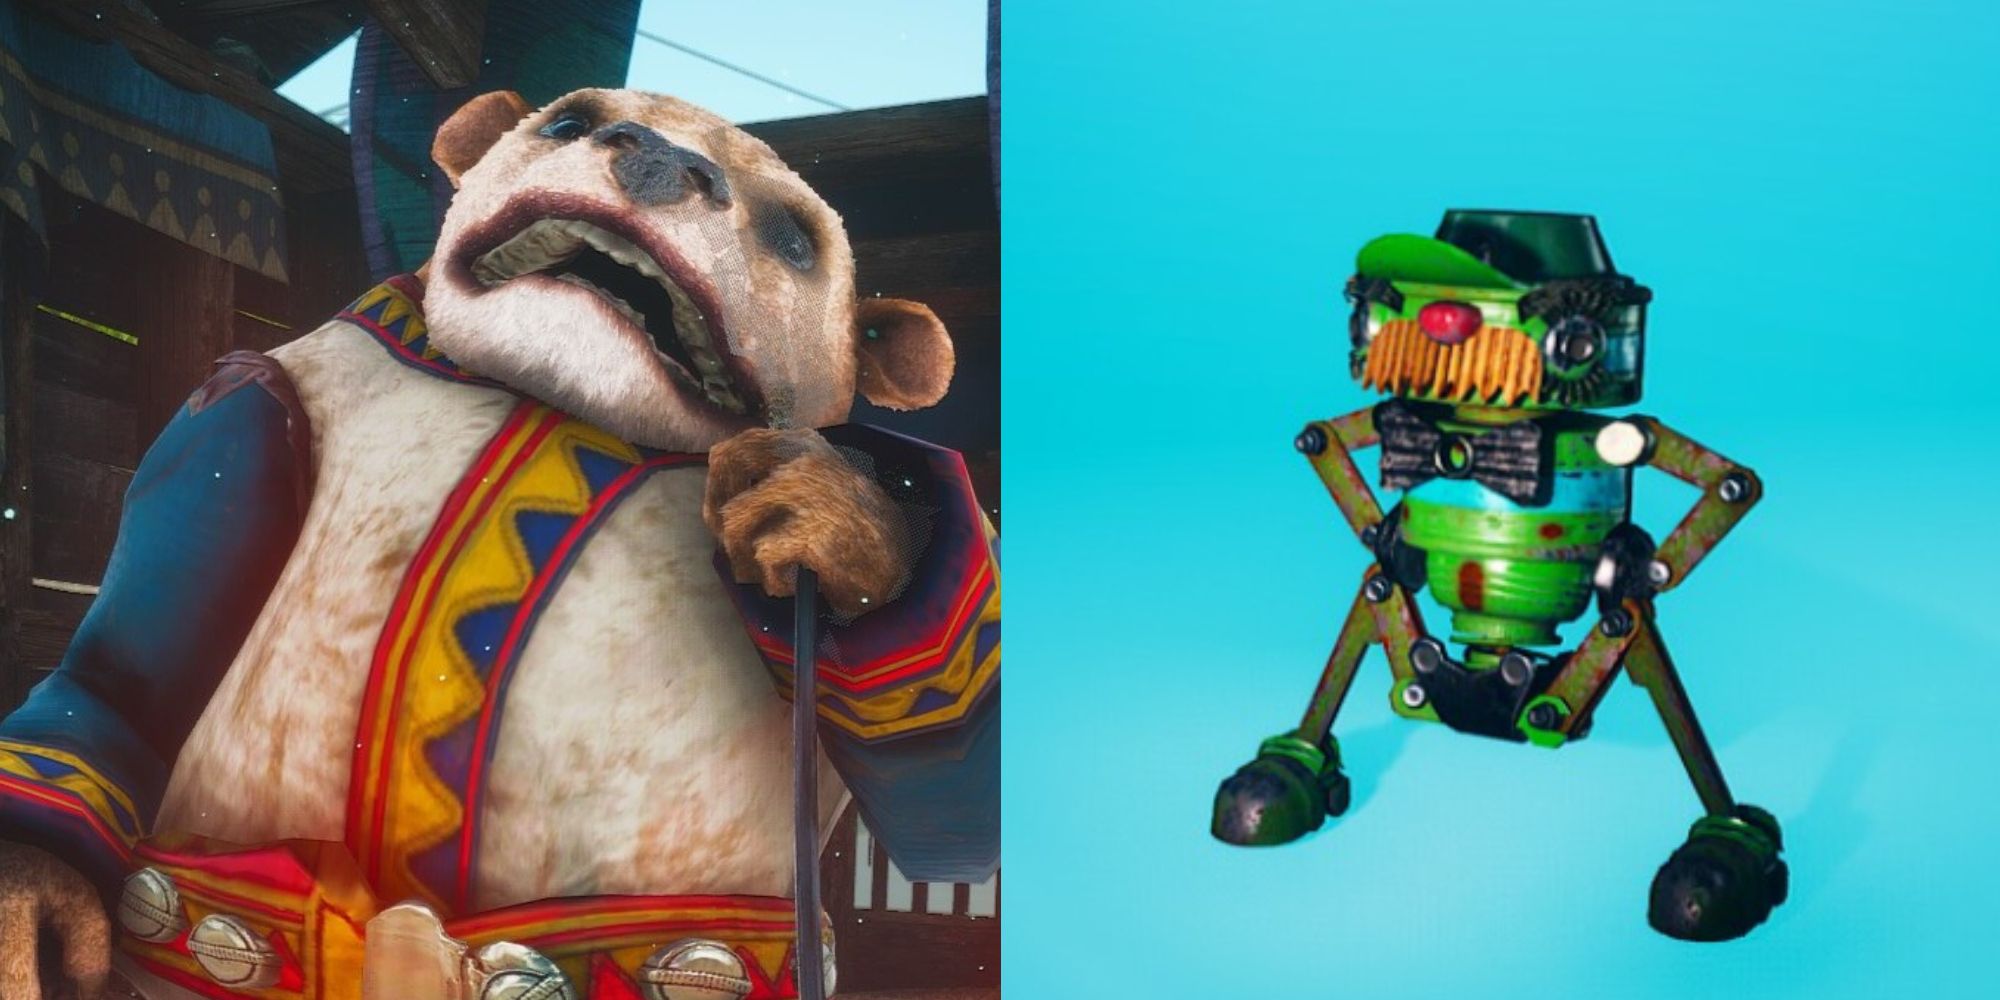 the mirage bear sitting down and the robot automaton from biomutant